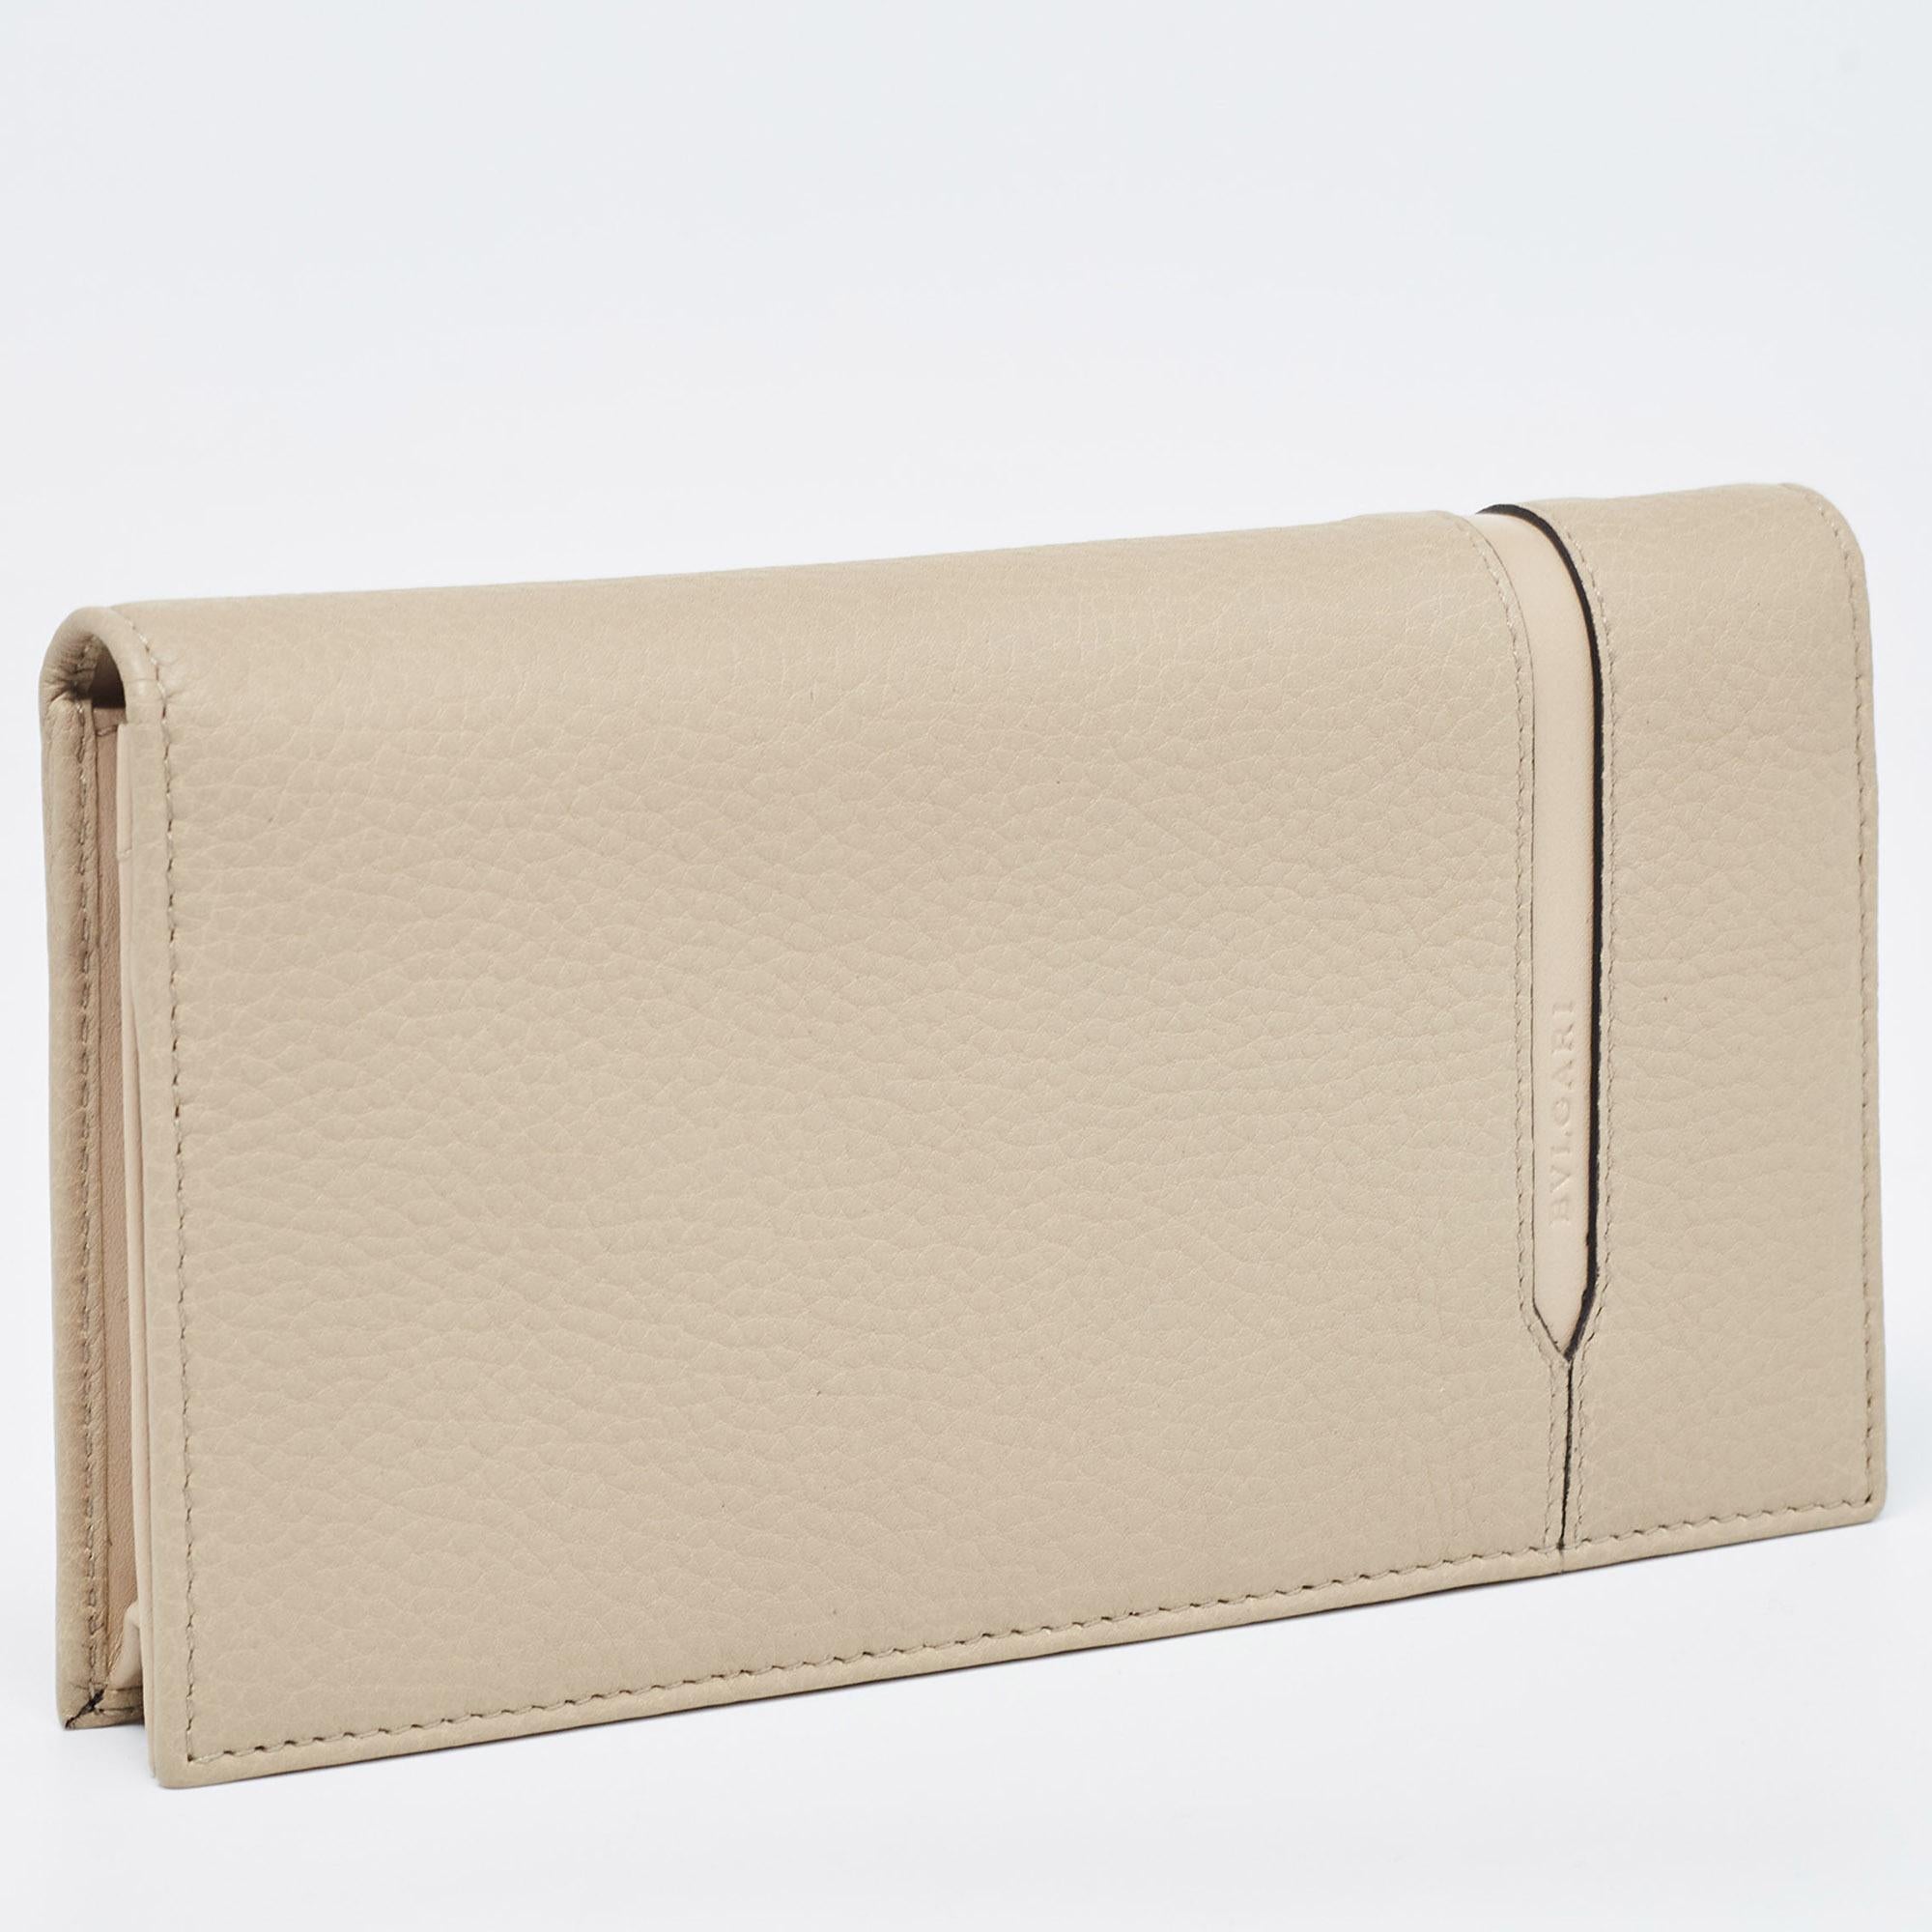 Compact and stylish, this wallet will be your favorite grab-and-go companion. Designed from quality materials, its interior is divided into different compartments to store your cards and cash perfectly.

